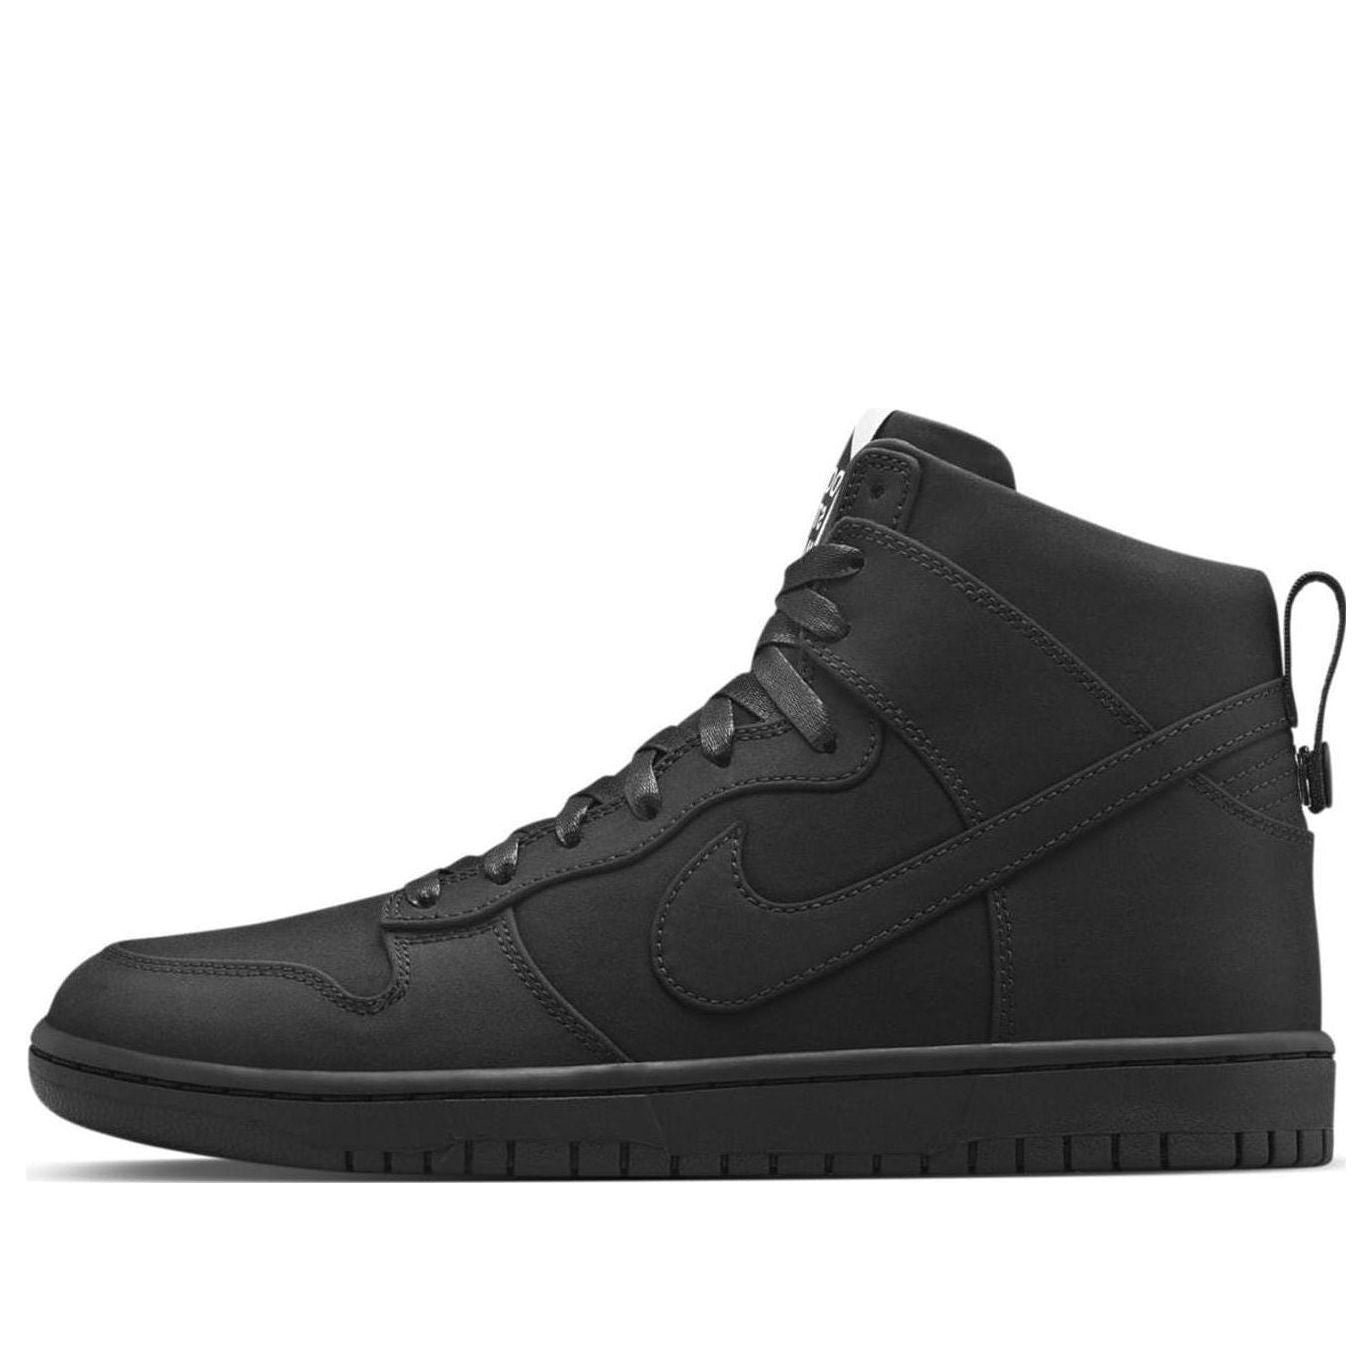 Nike Dunk Lux SP 'DSM'  718766-001 Classic Sneakers